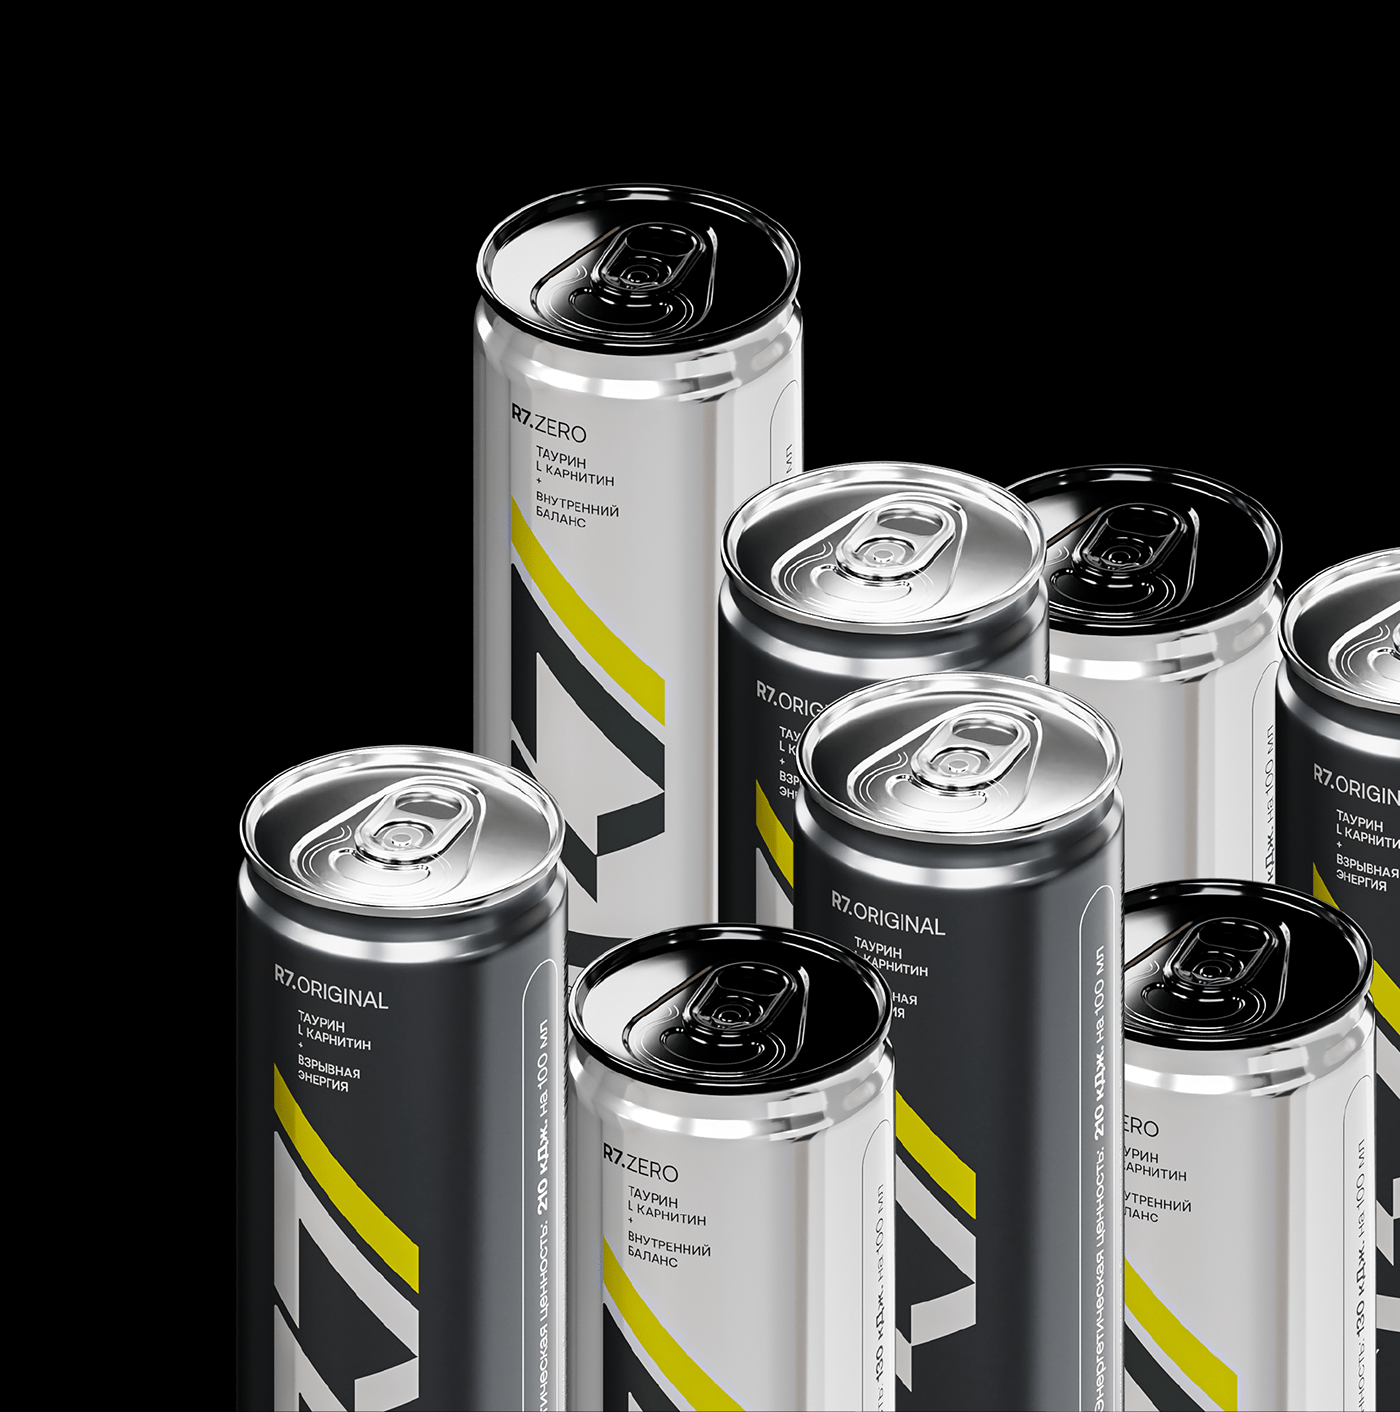 action energy energy drink extreme identity Packaging Retail soda speed sport